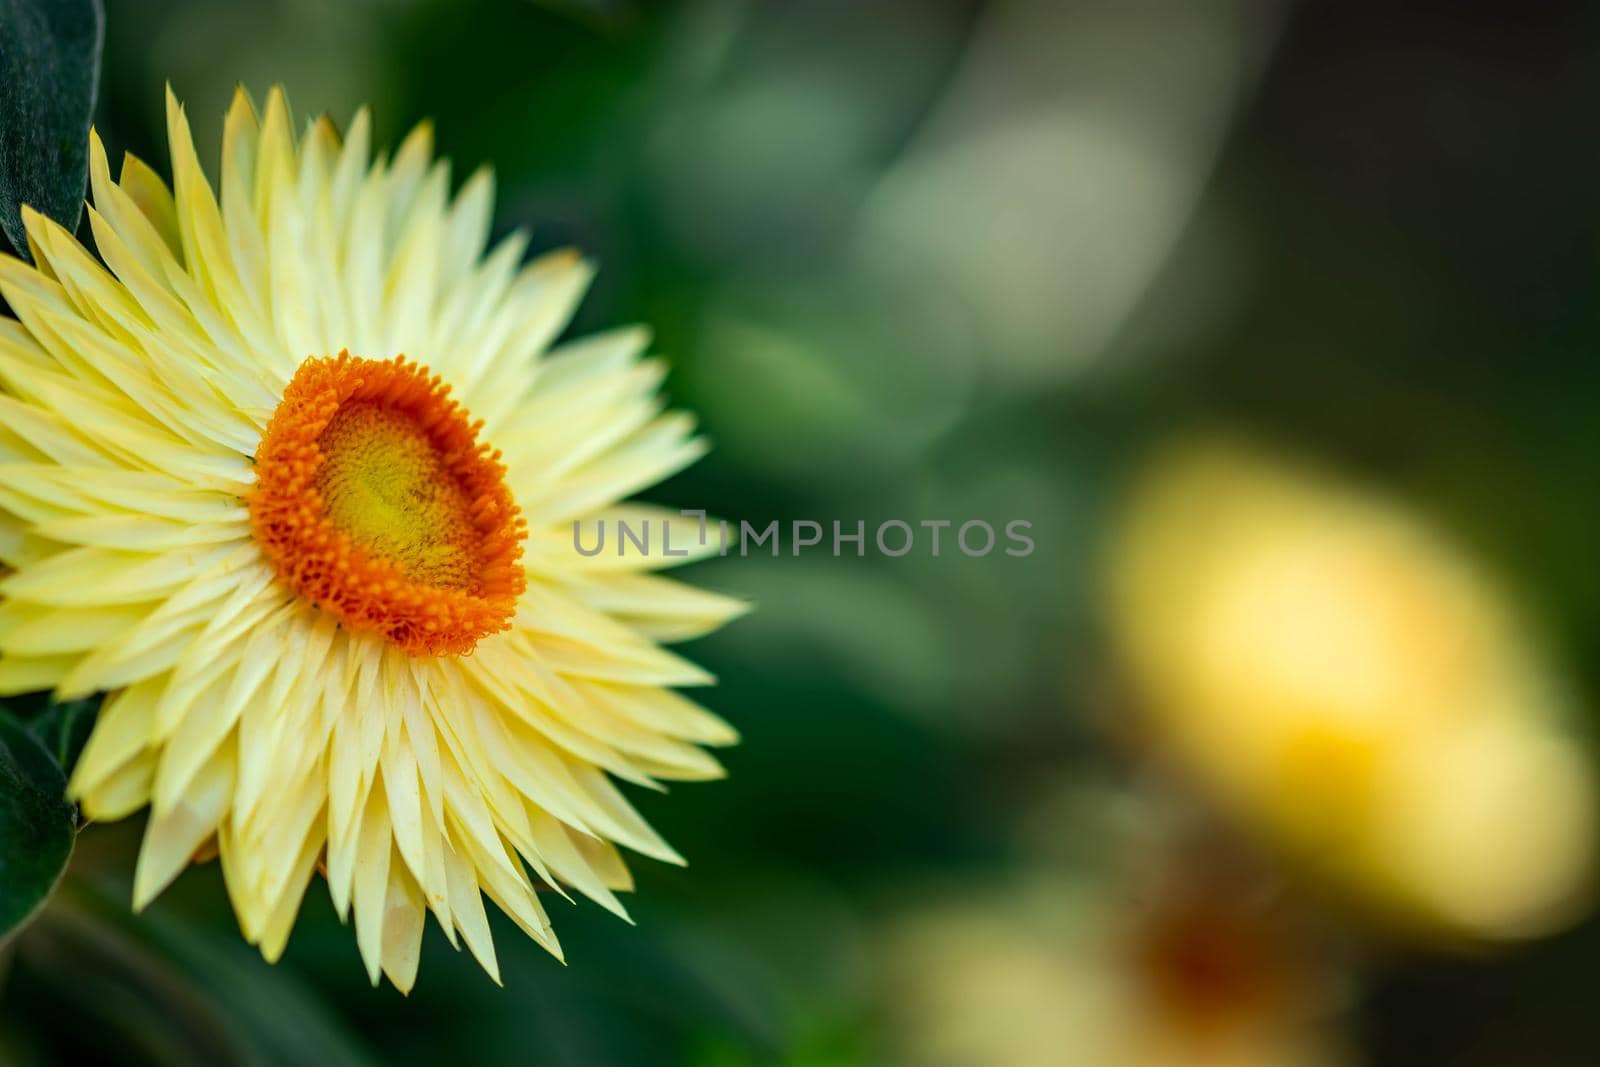 horizontal image of an orange flower with yellow petals with a soft bokeh green background image with some space for text